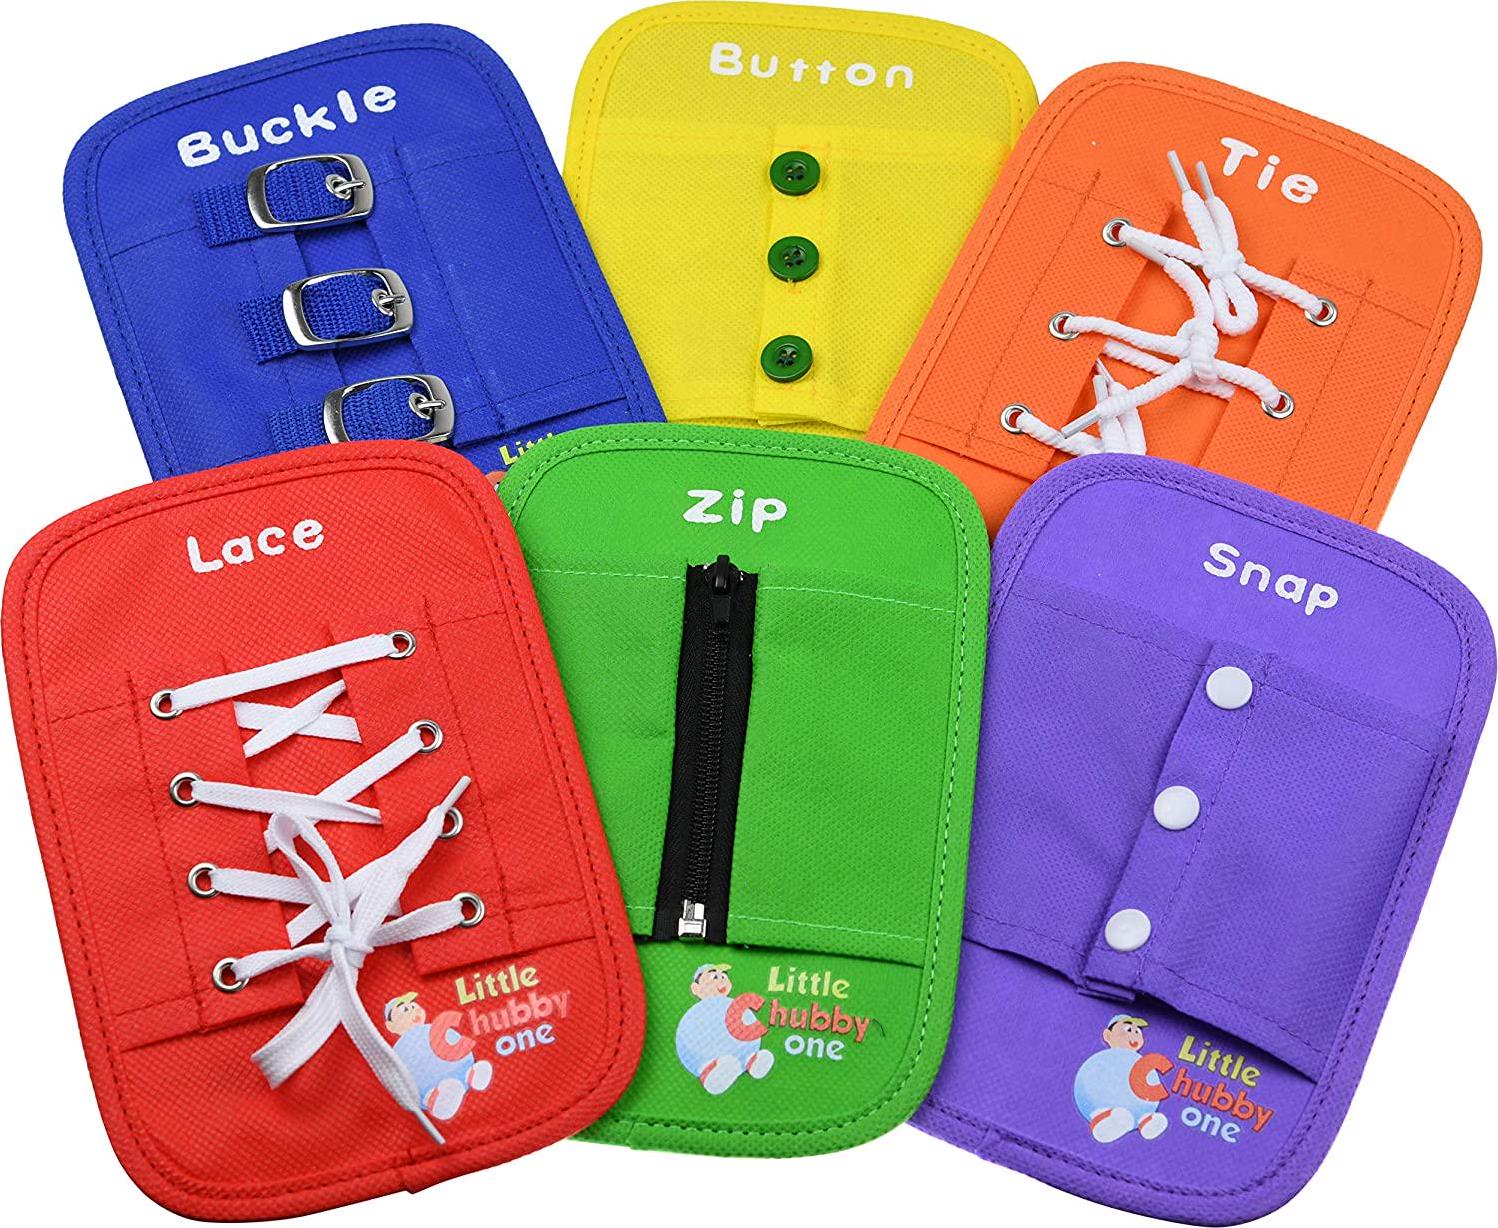 LITTLE CHUBBY ONE, Little Chubby One Busy Board Set - Learning Activity Toy - Educational Toy Helps Develop Motor Skills Dress Skills Color Recognition and Hand Eye Coordination Perfect for Traveling (8x10.5 Inches)